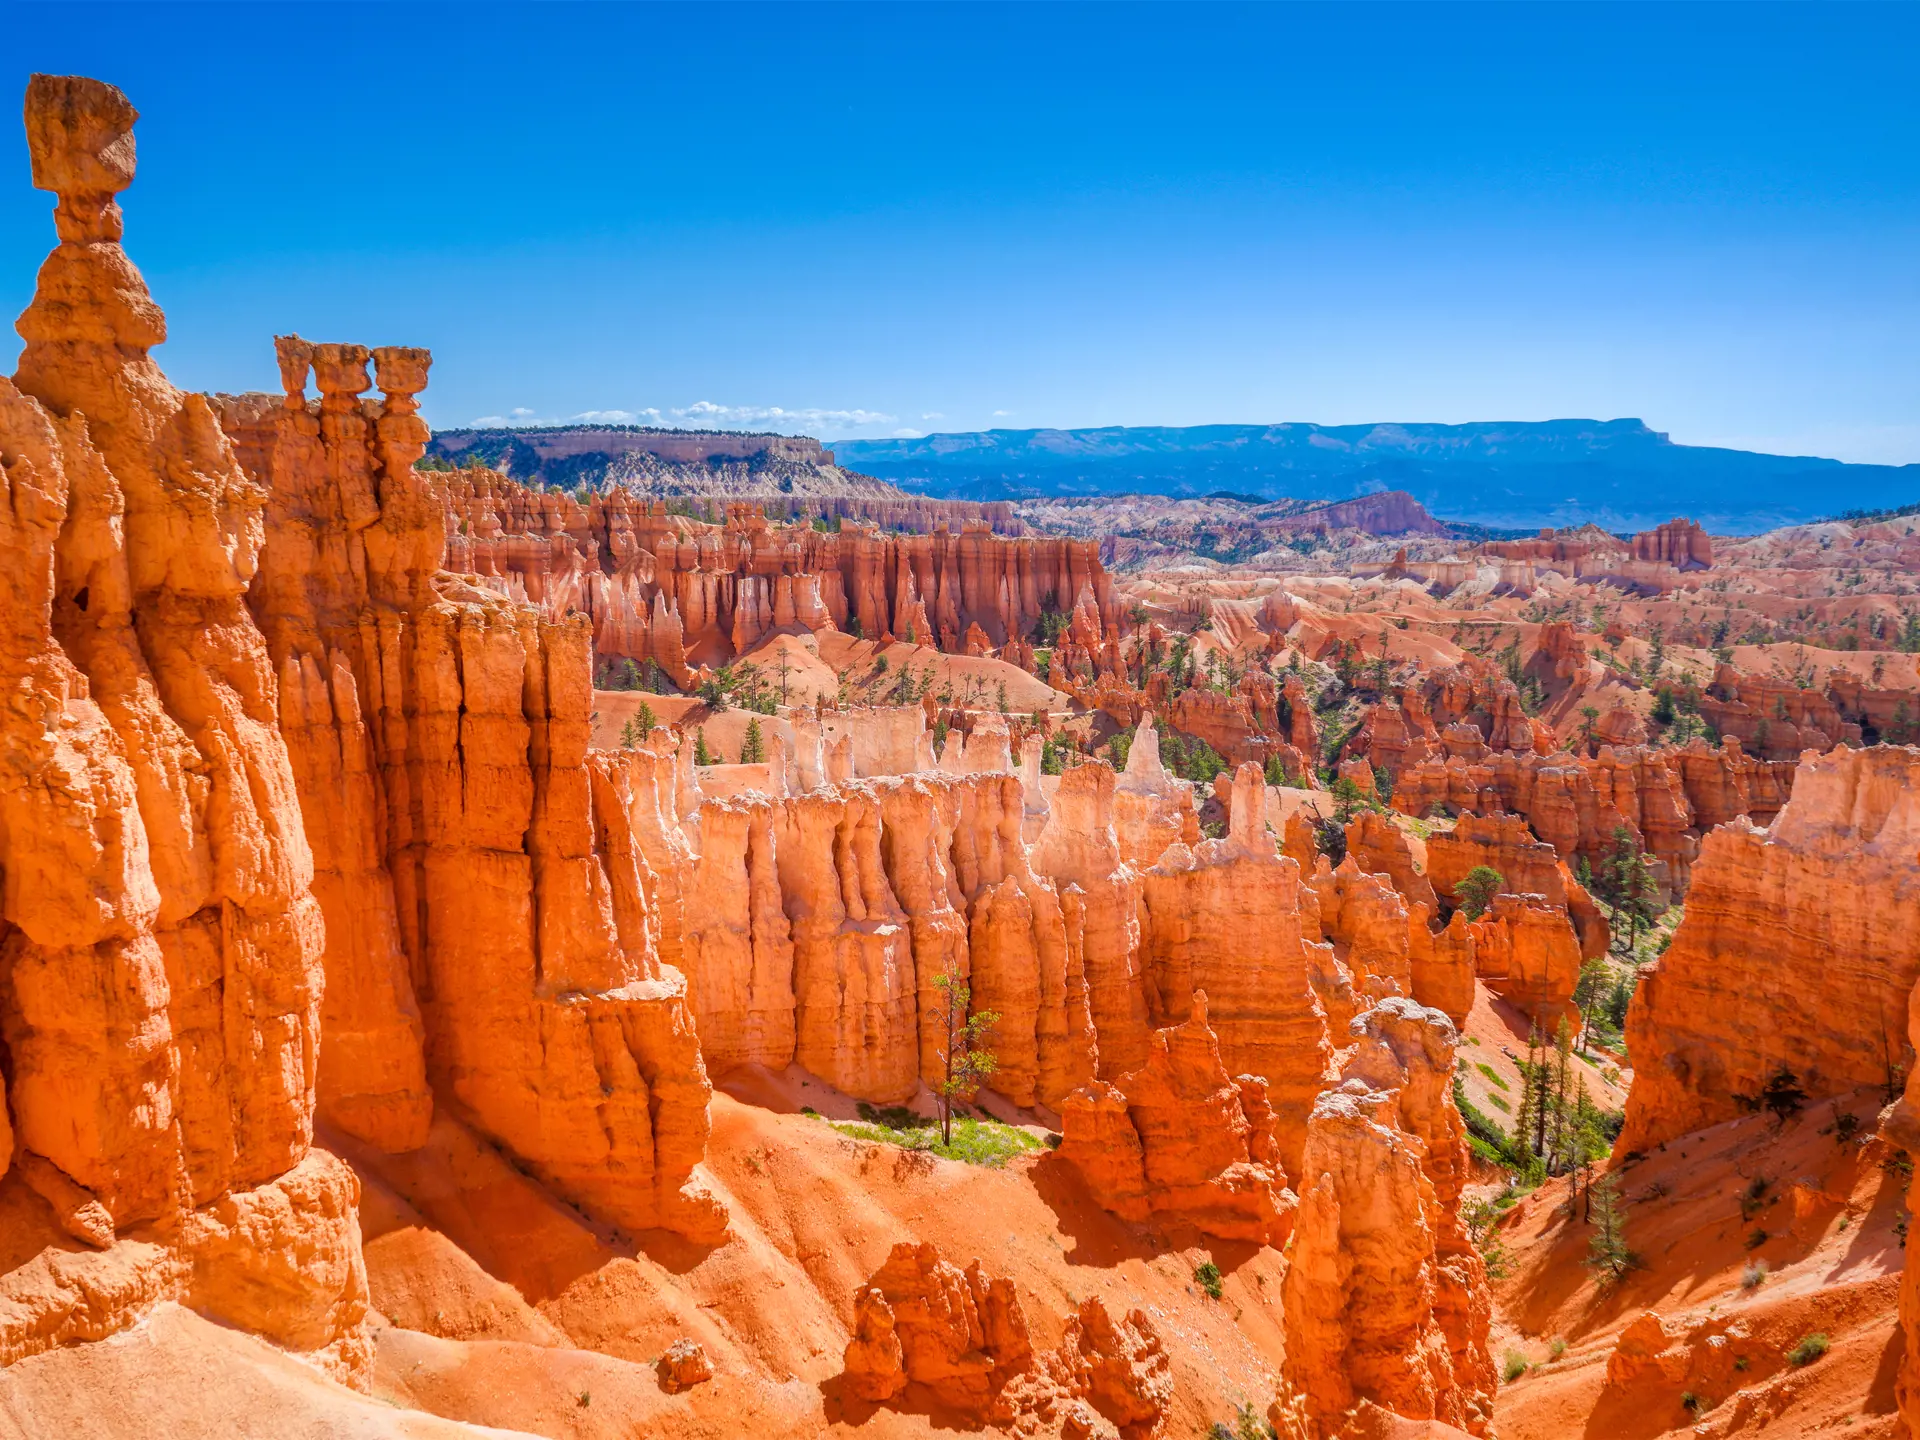 shutterstock_232015471 The Bryce Canyon National Park, Utah, United States.jpg